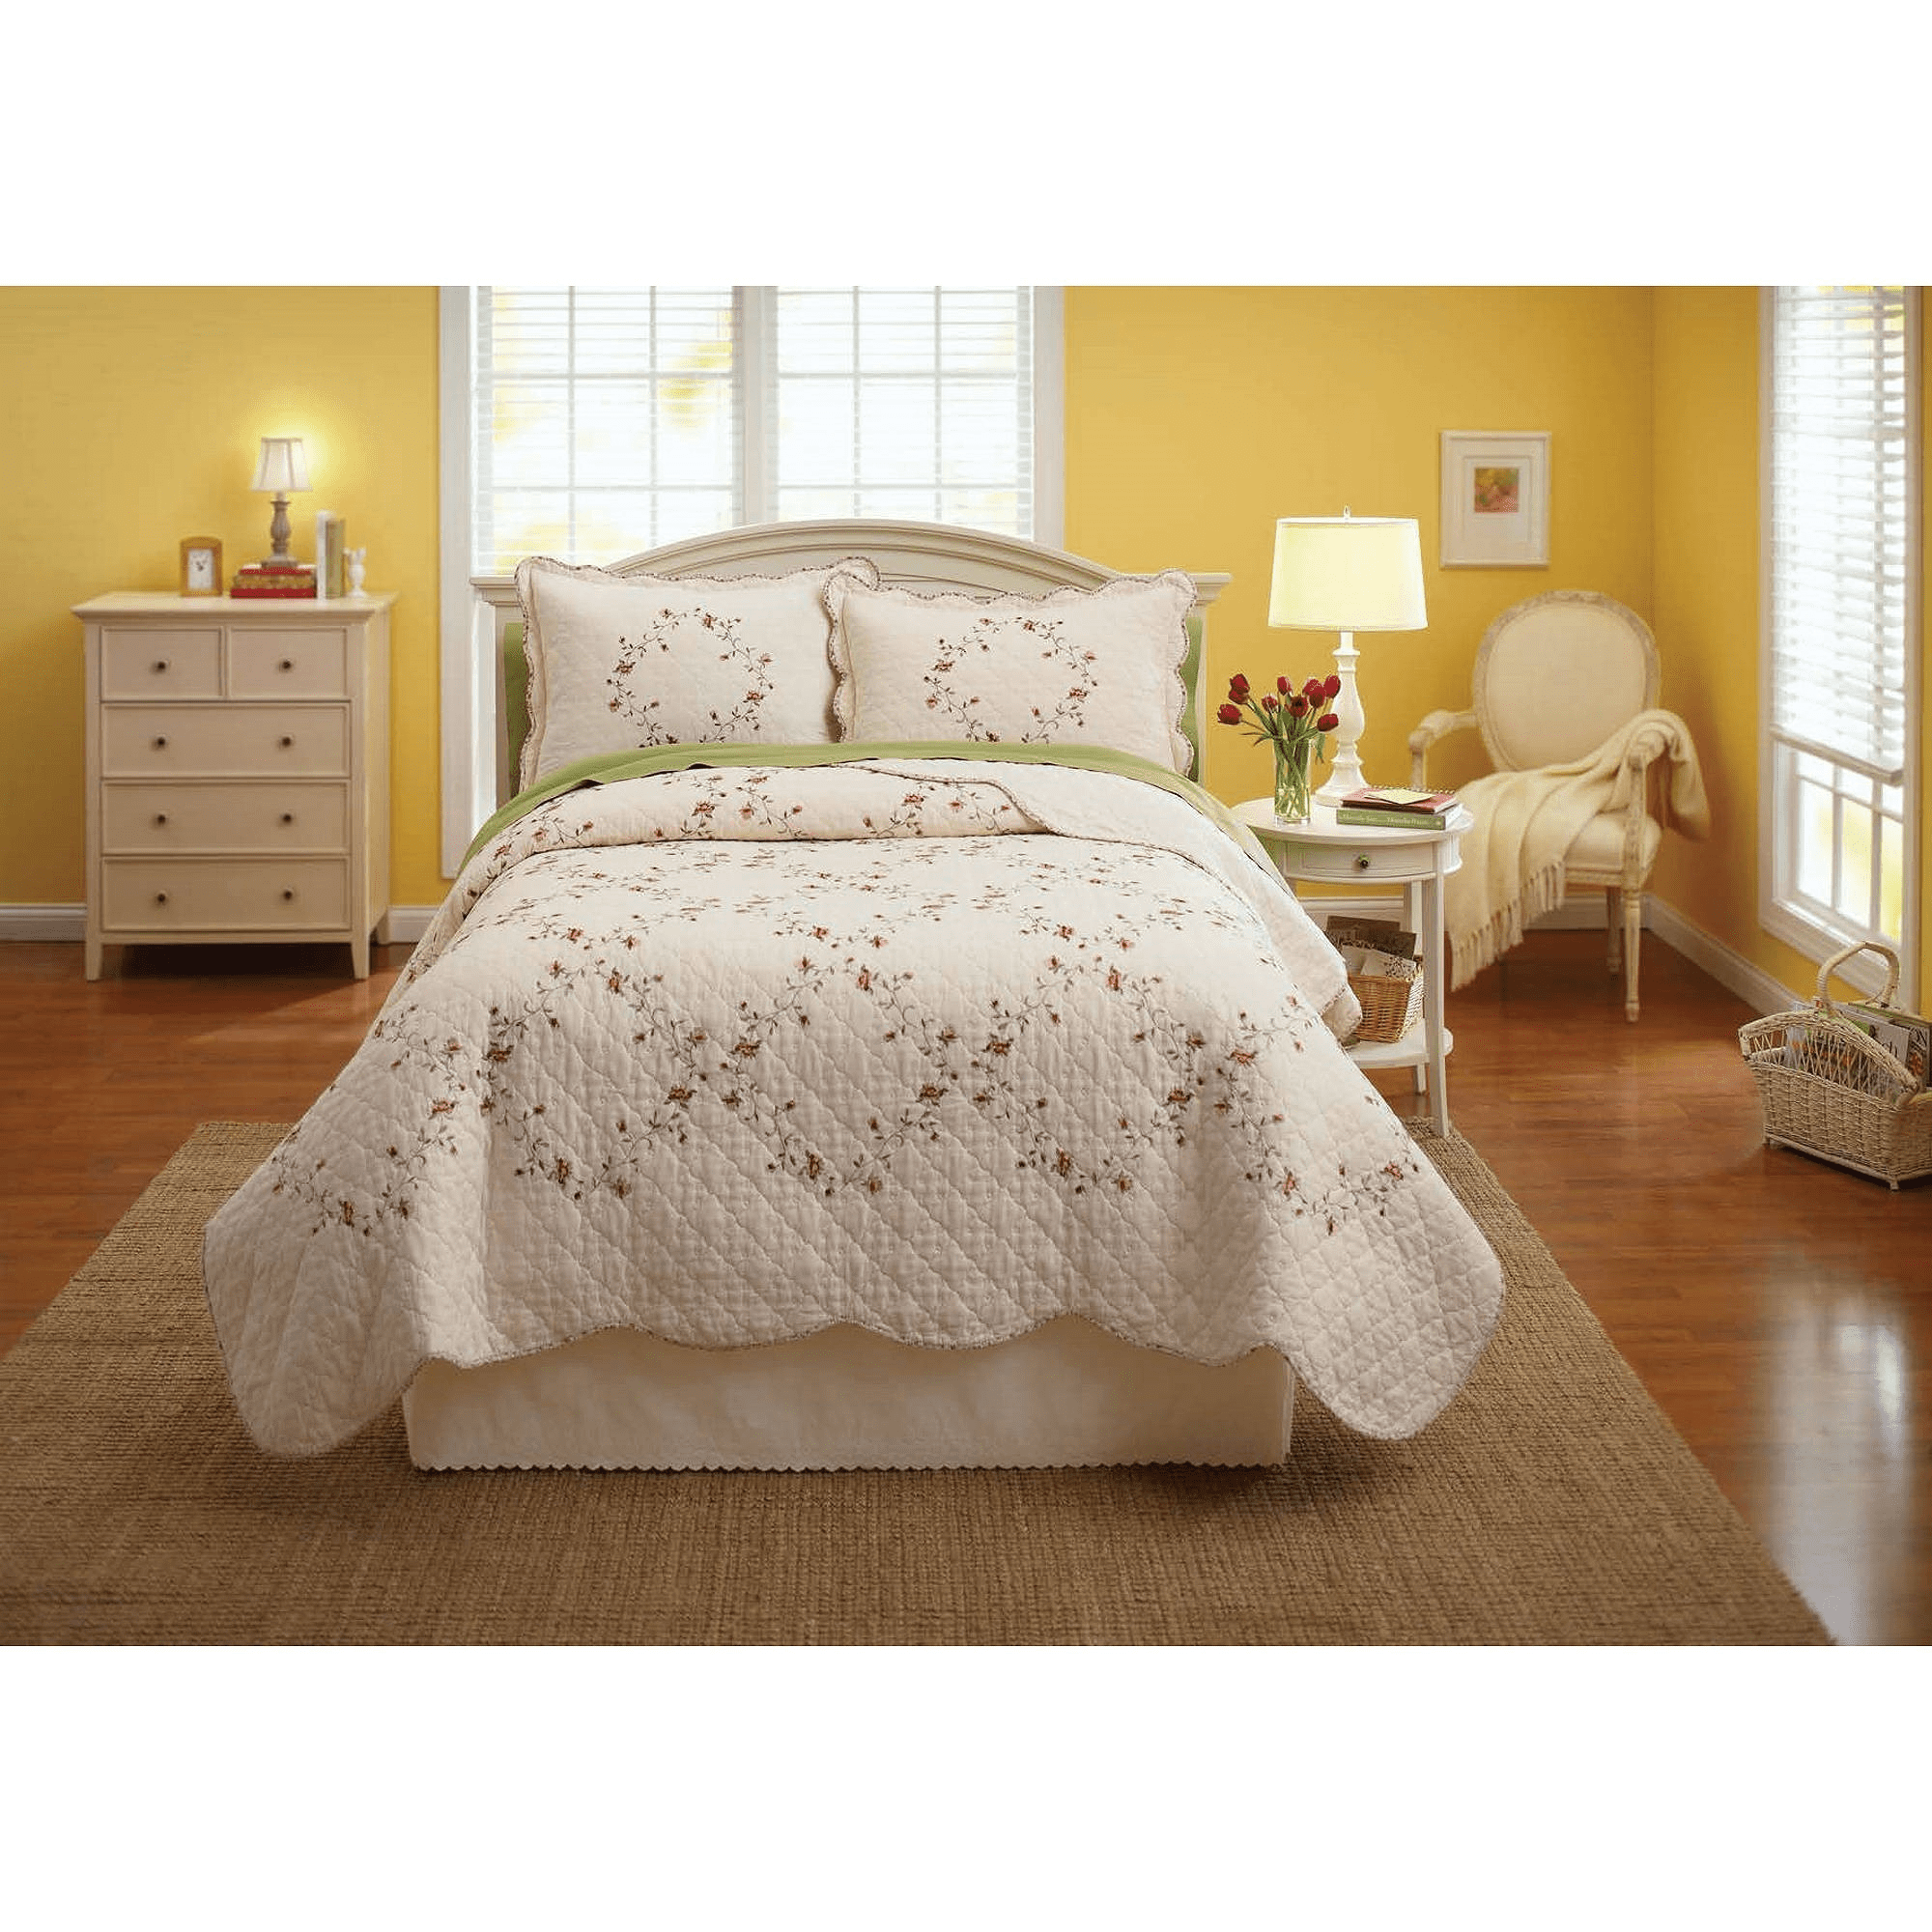 Details about   Lace Princess Surface Bed Dress Single and Double Complete King Size Bed Dress 